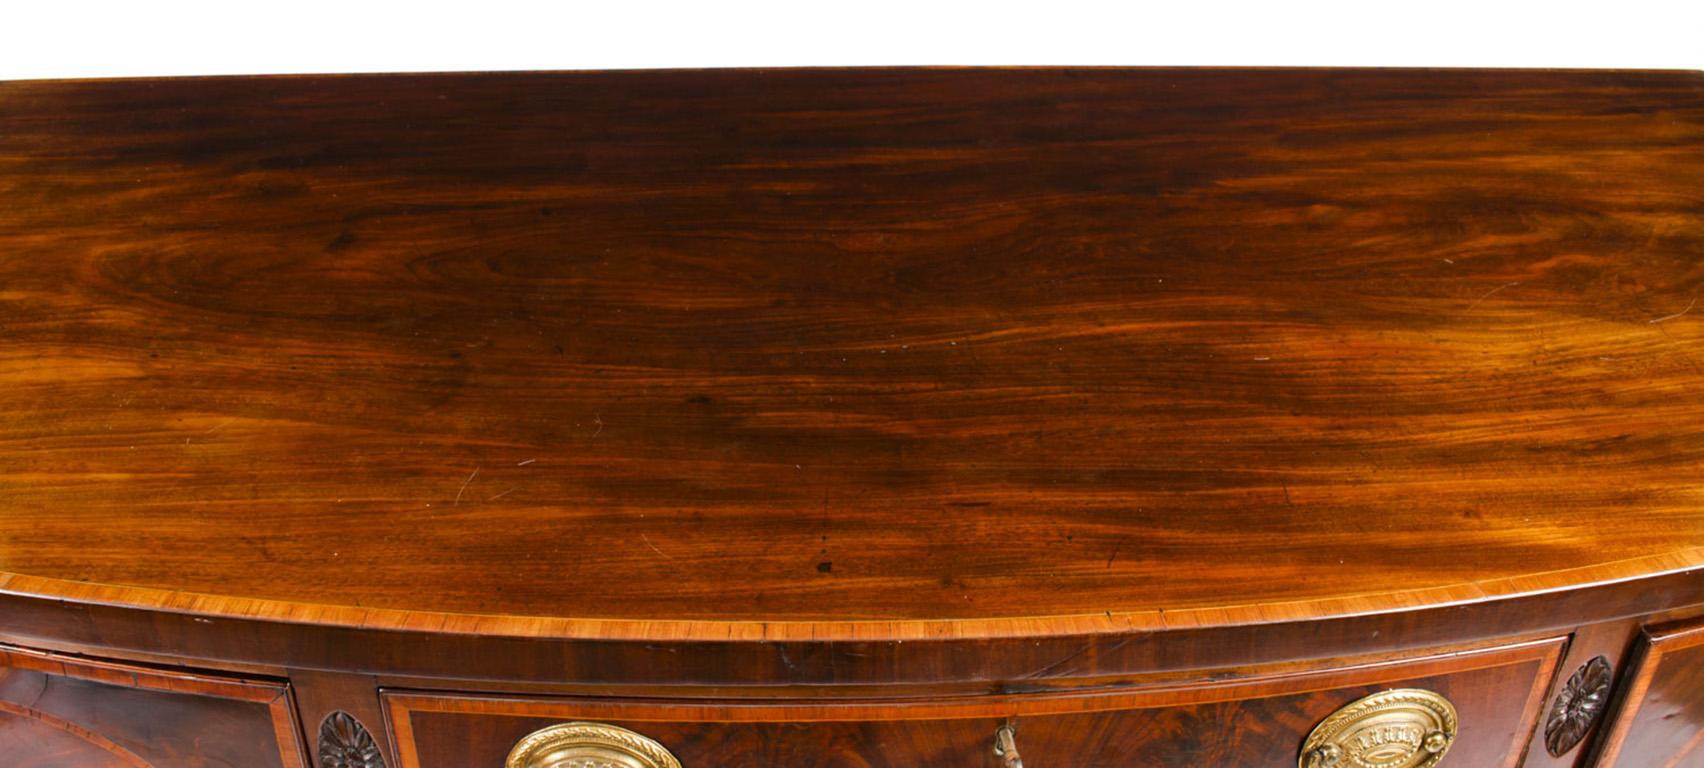 Antique George III Inlaid Flame Mahogany Sideboard, 18th Century In Good Condition For Sale In London, GB